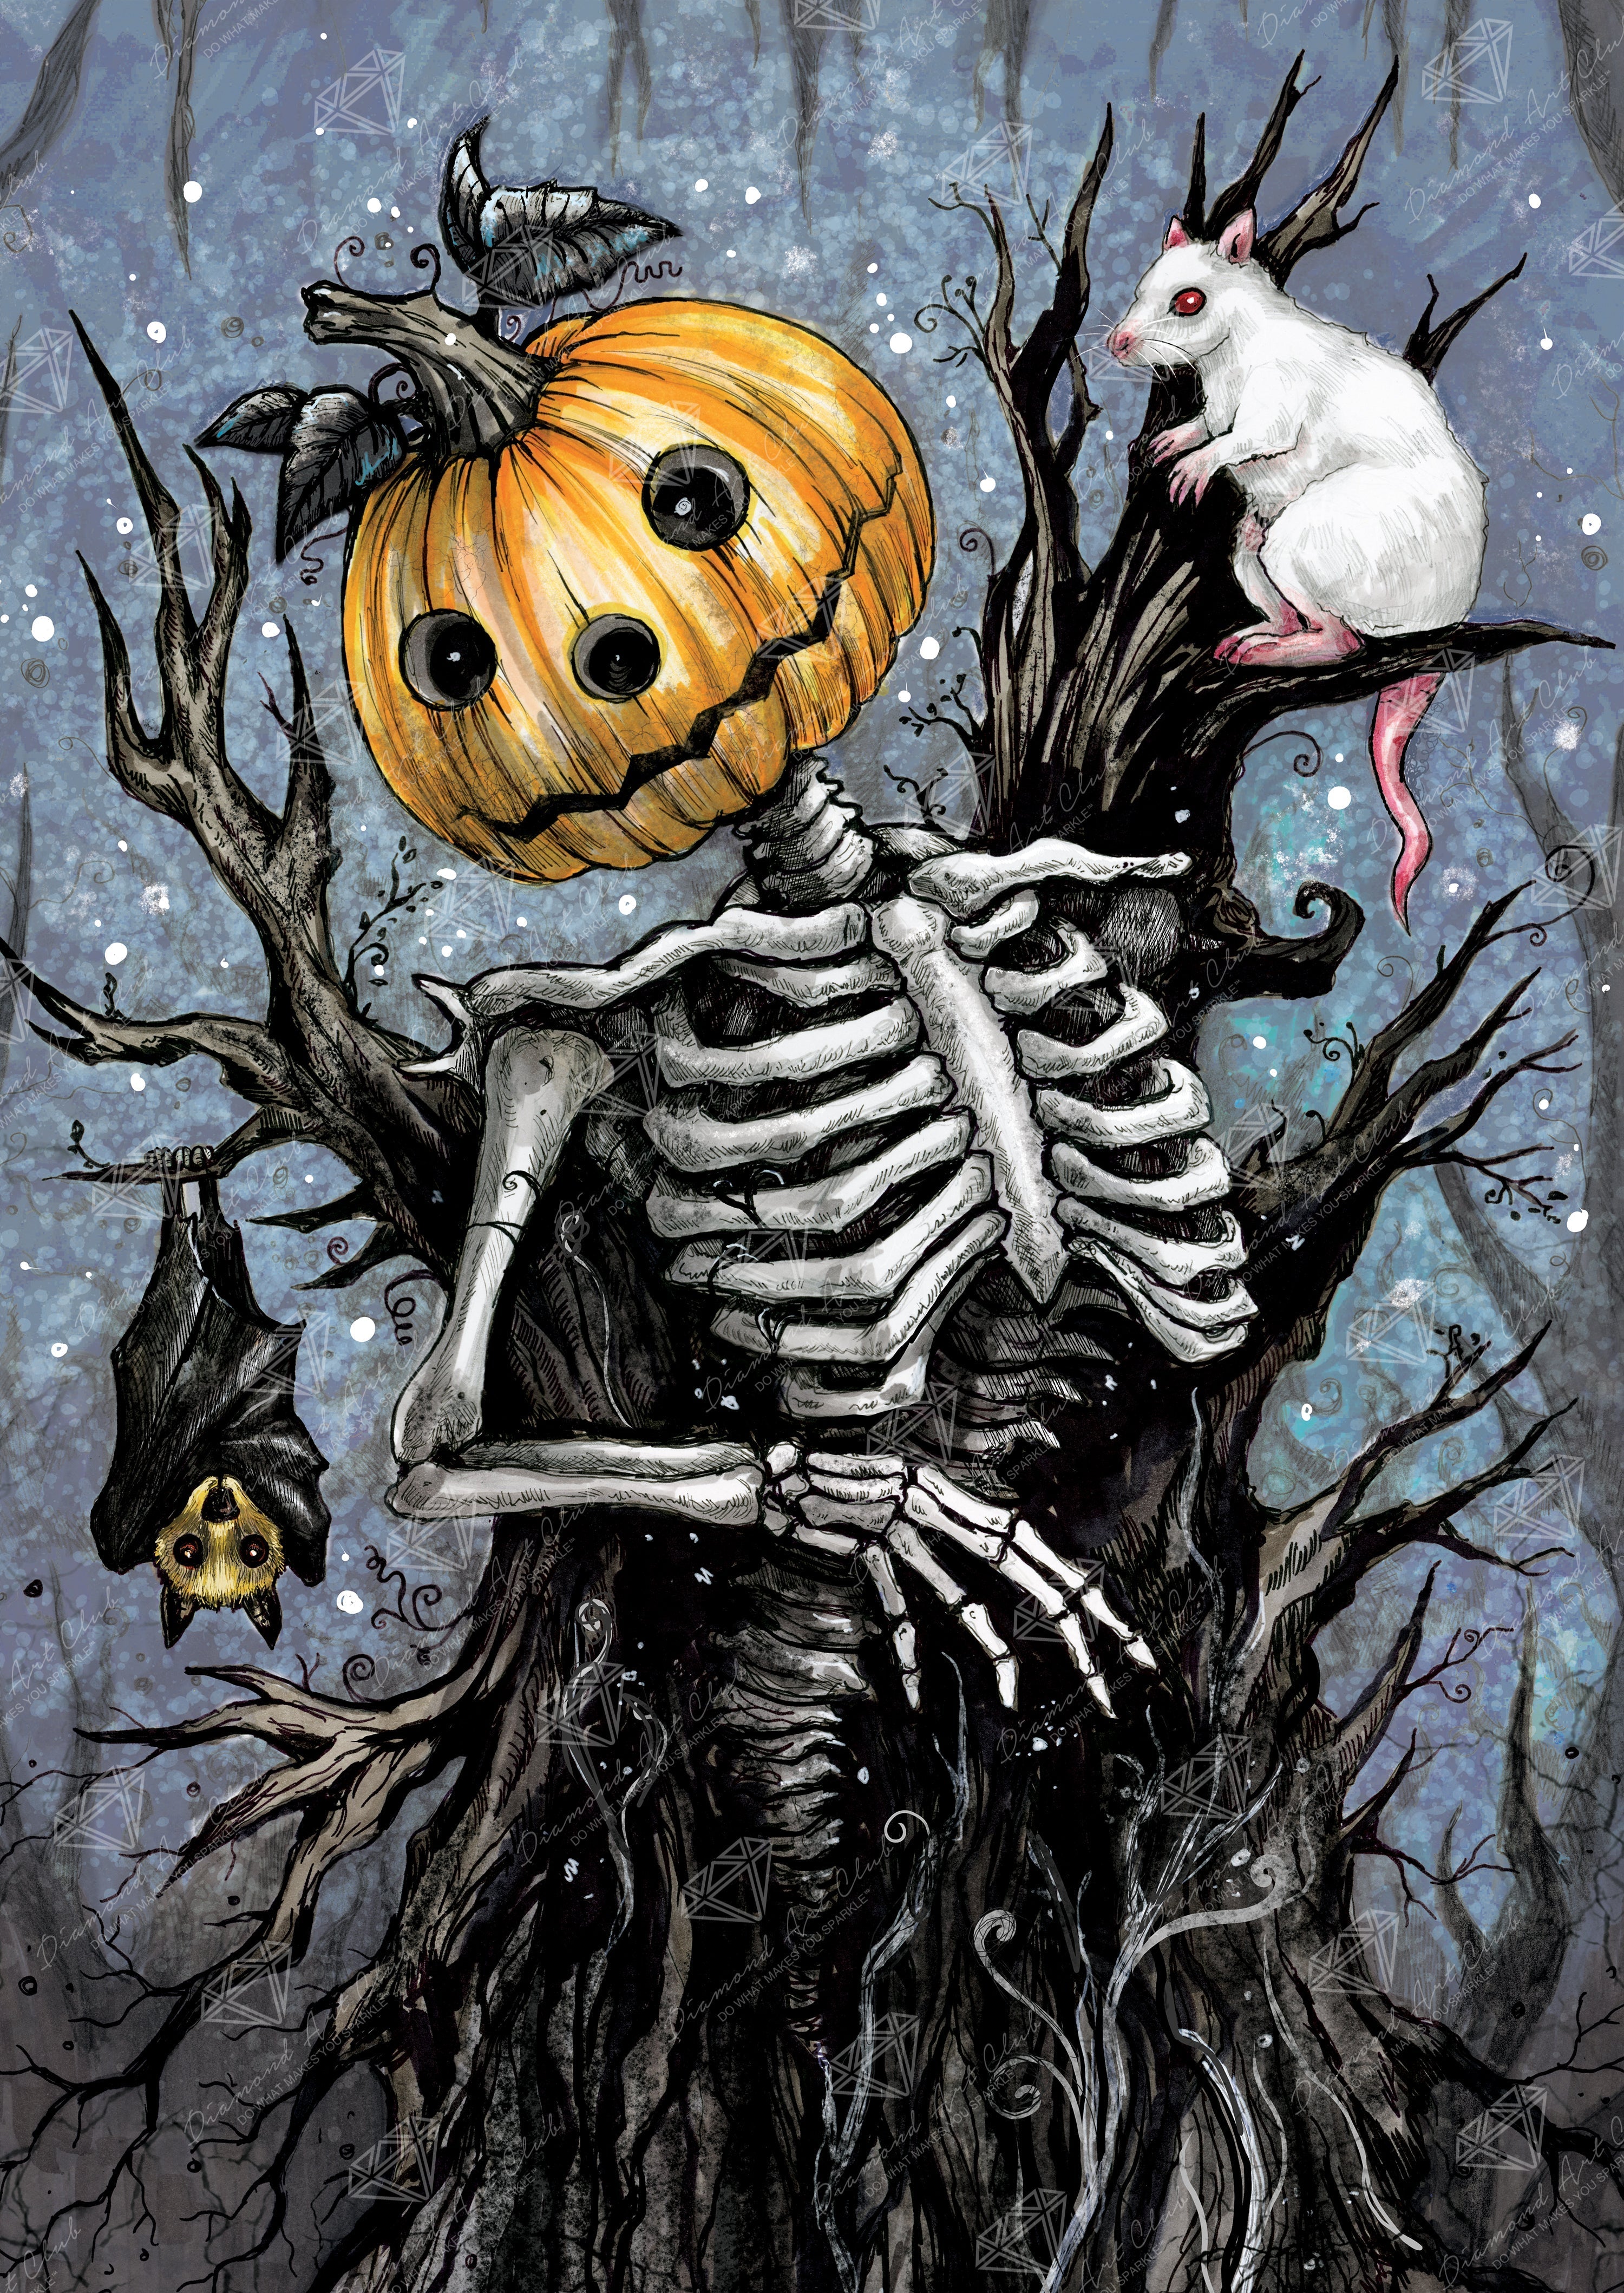 Halloween Holiday Sticker by Creepy Gals for iOS & Android